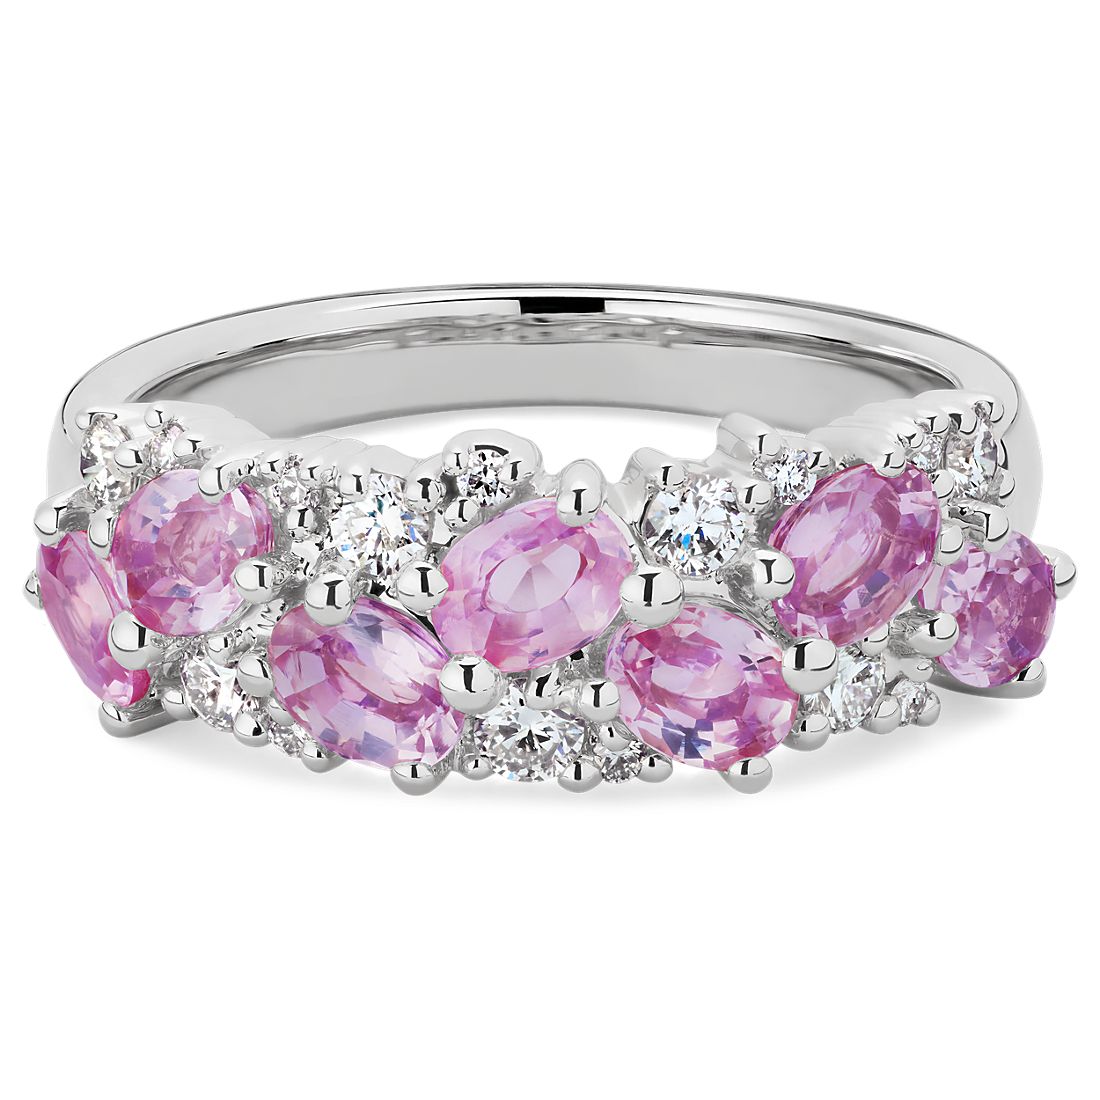 Romantic Oval Pink Sapphire and Diamond Ring in Platinum (0.23 ct. tw.)